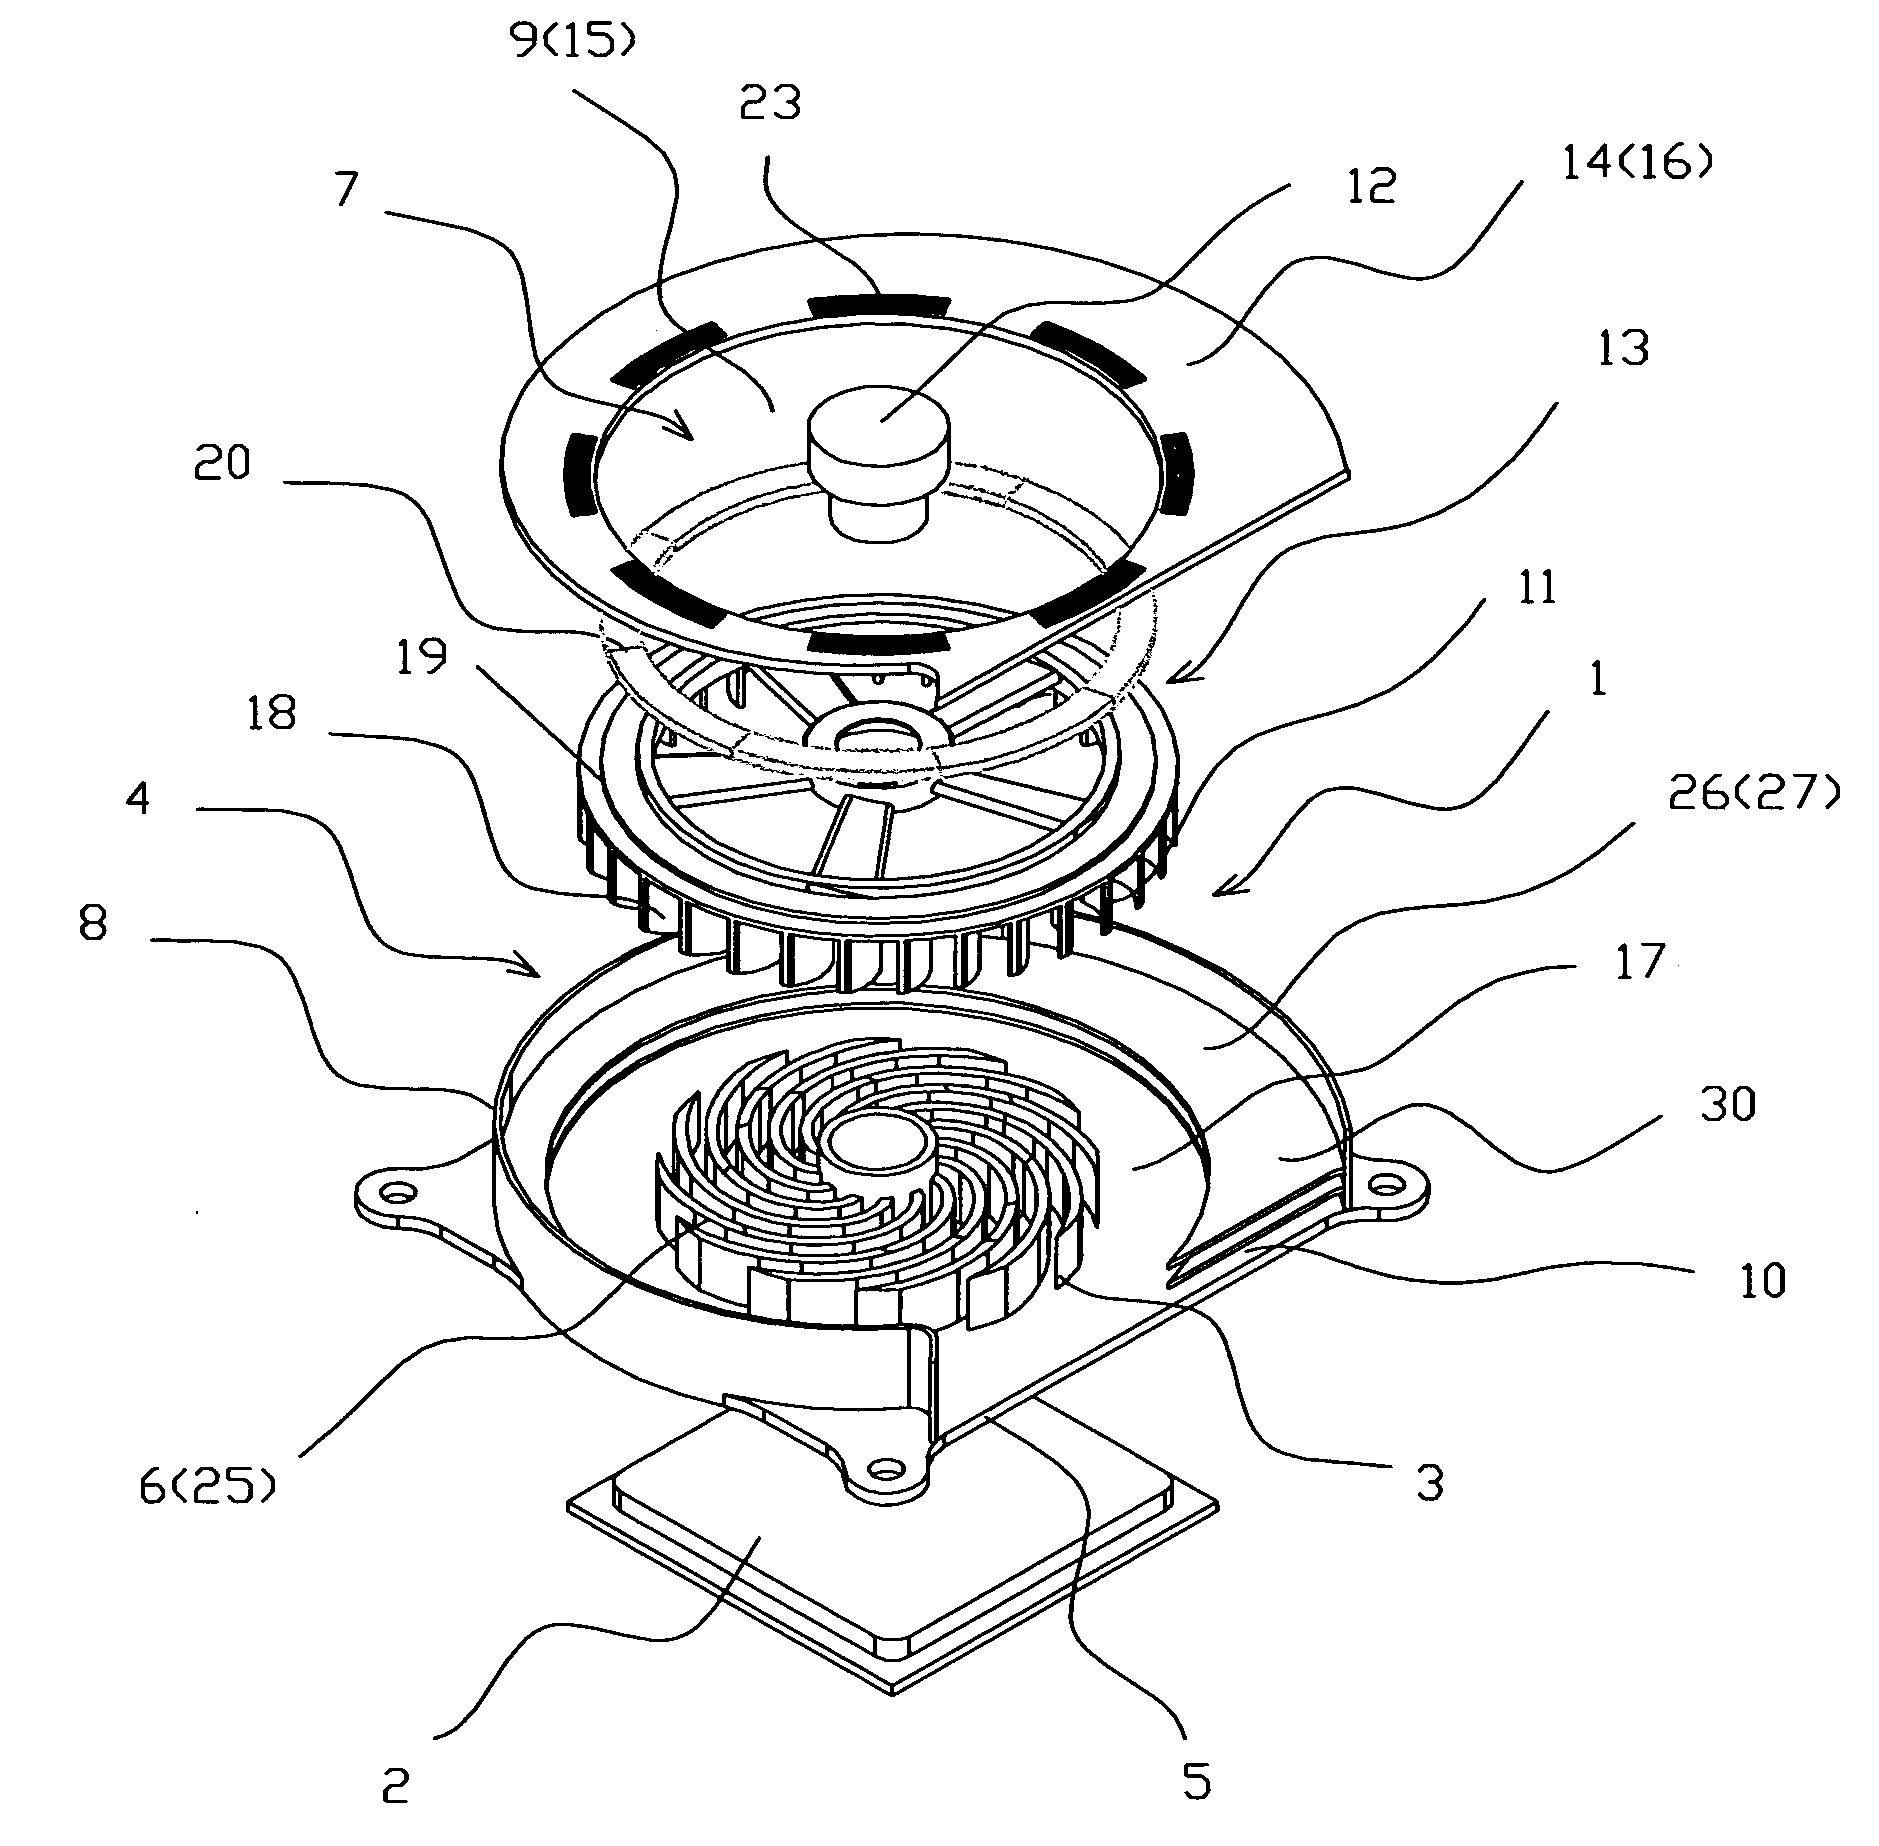 Integrated cooler for electronic devices